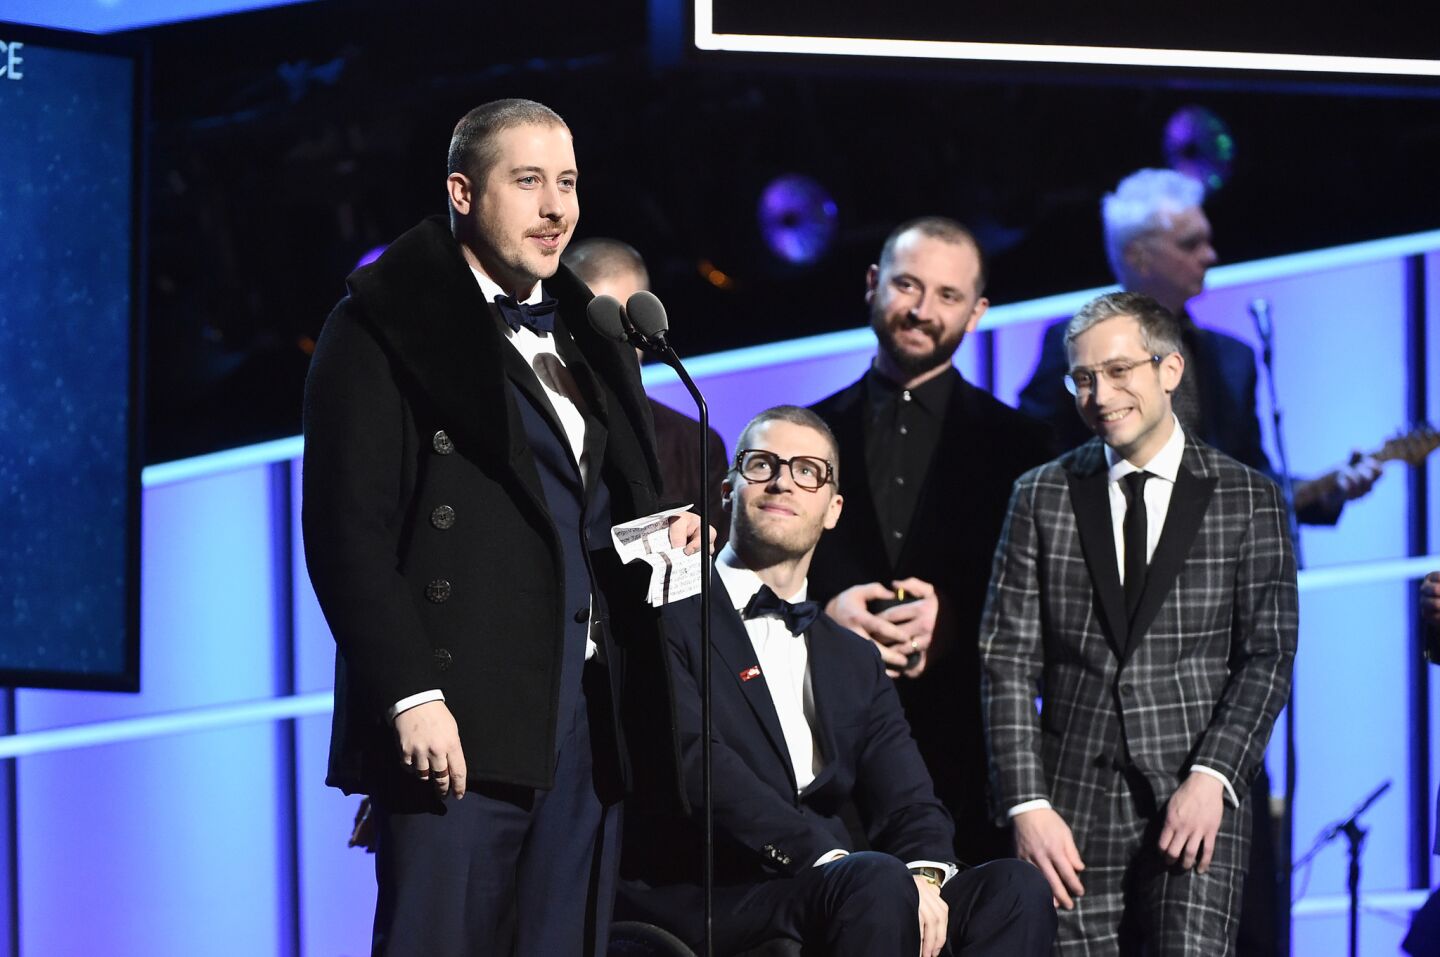 Left to right, recording artists Zachary Scott Carothers, Eric Howk, Jason Wade Sechrist, Kyle O'Quin of Portugal. The Man, winners of pop duo/group performance for "Feel It Still," accept the award at the pre-telecast show.